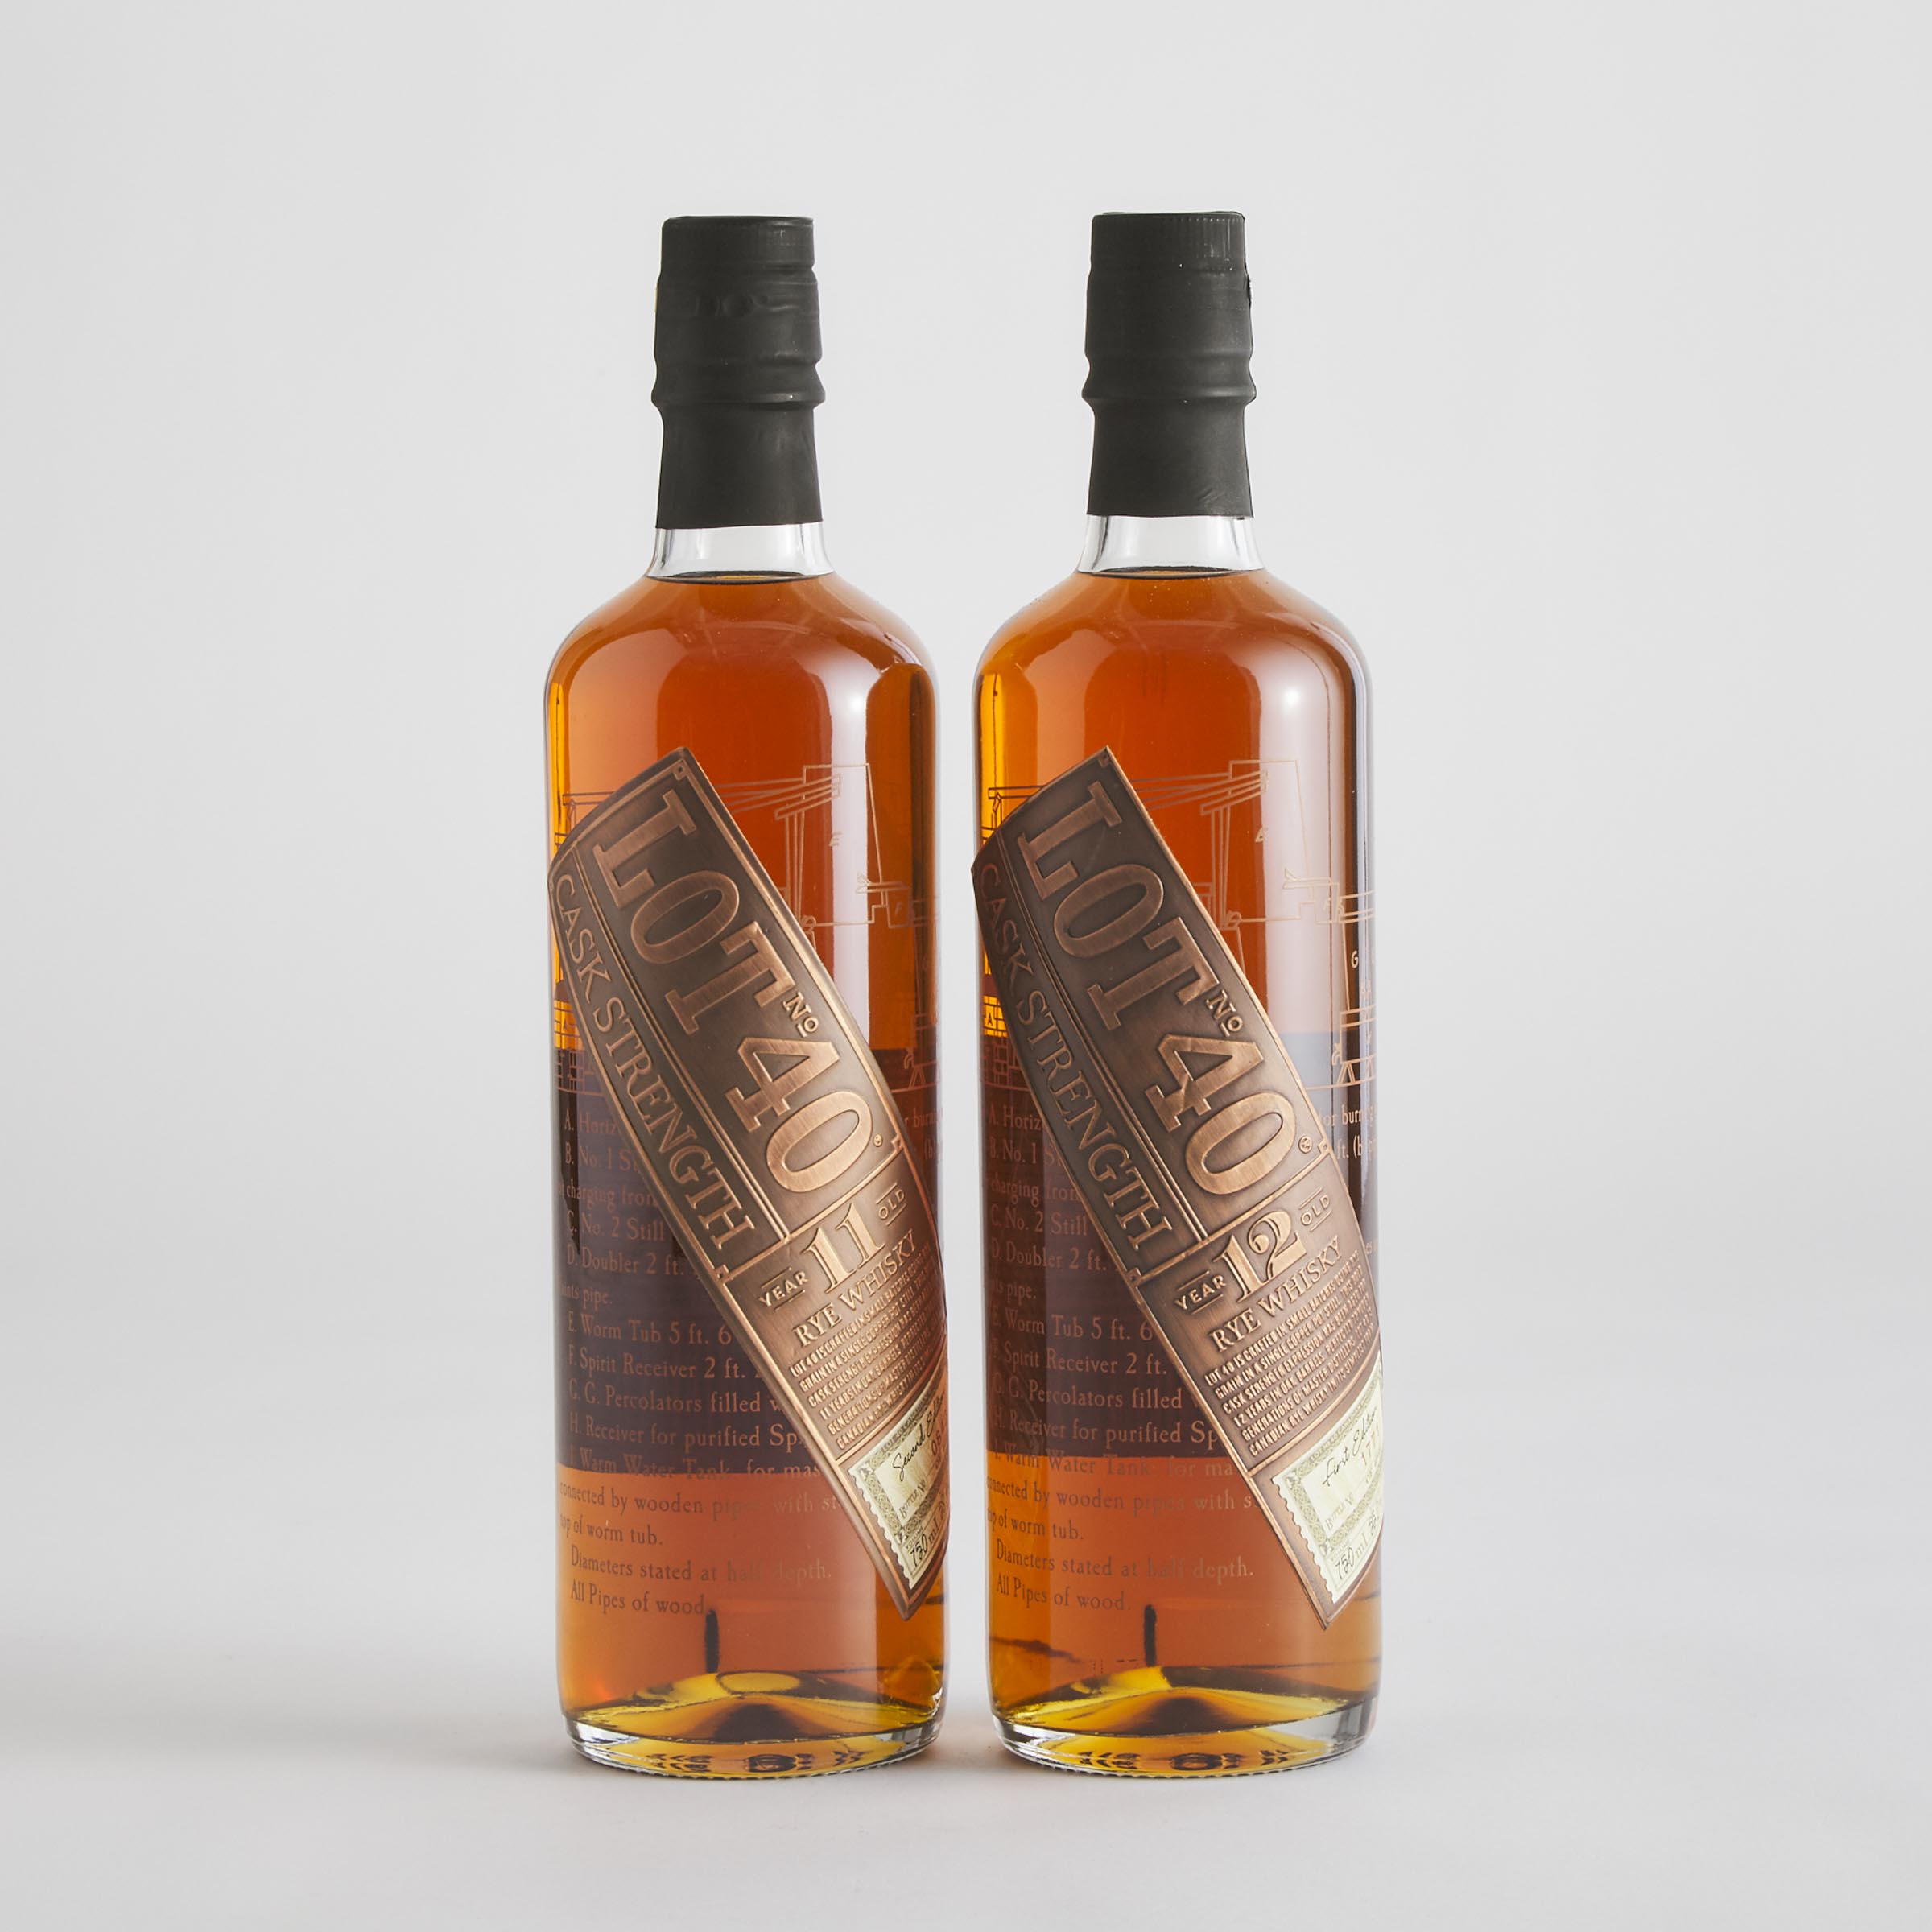 LOT 40 CASK STRENGTH RYE WHISKY 12 YEARS (ONE 750 ML)
LOT 40 CASK STRENGTH RYE WHISKY 11 YEARS (ONE 750 ML)